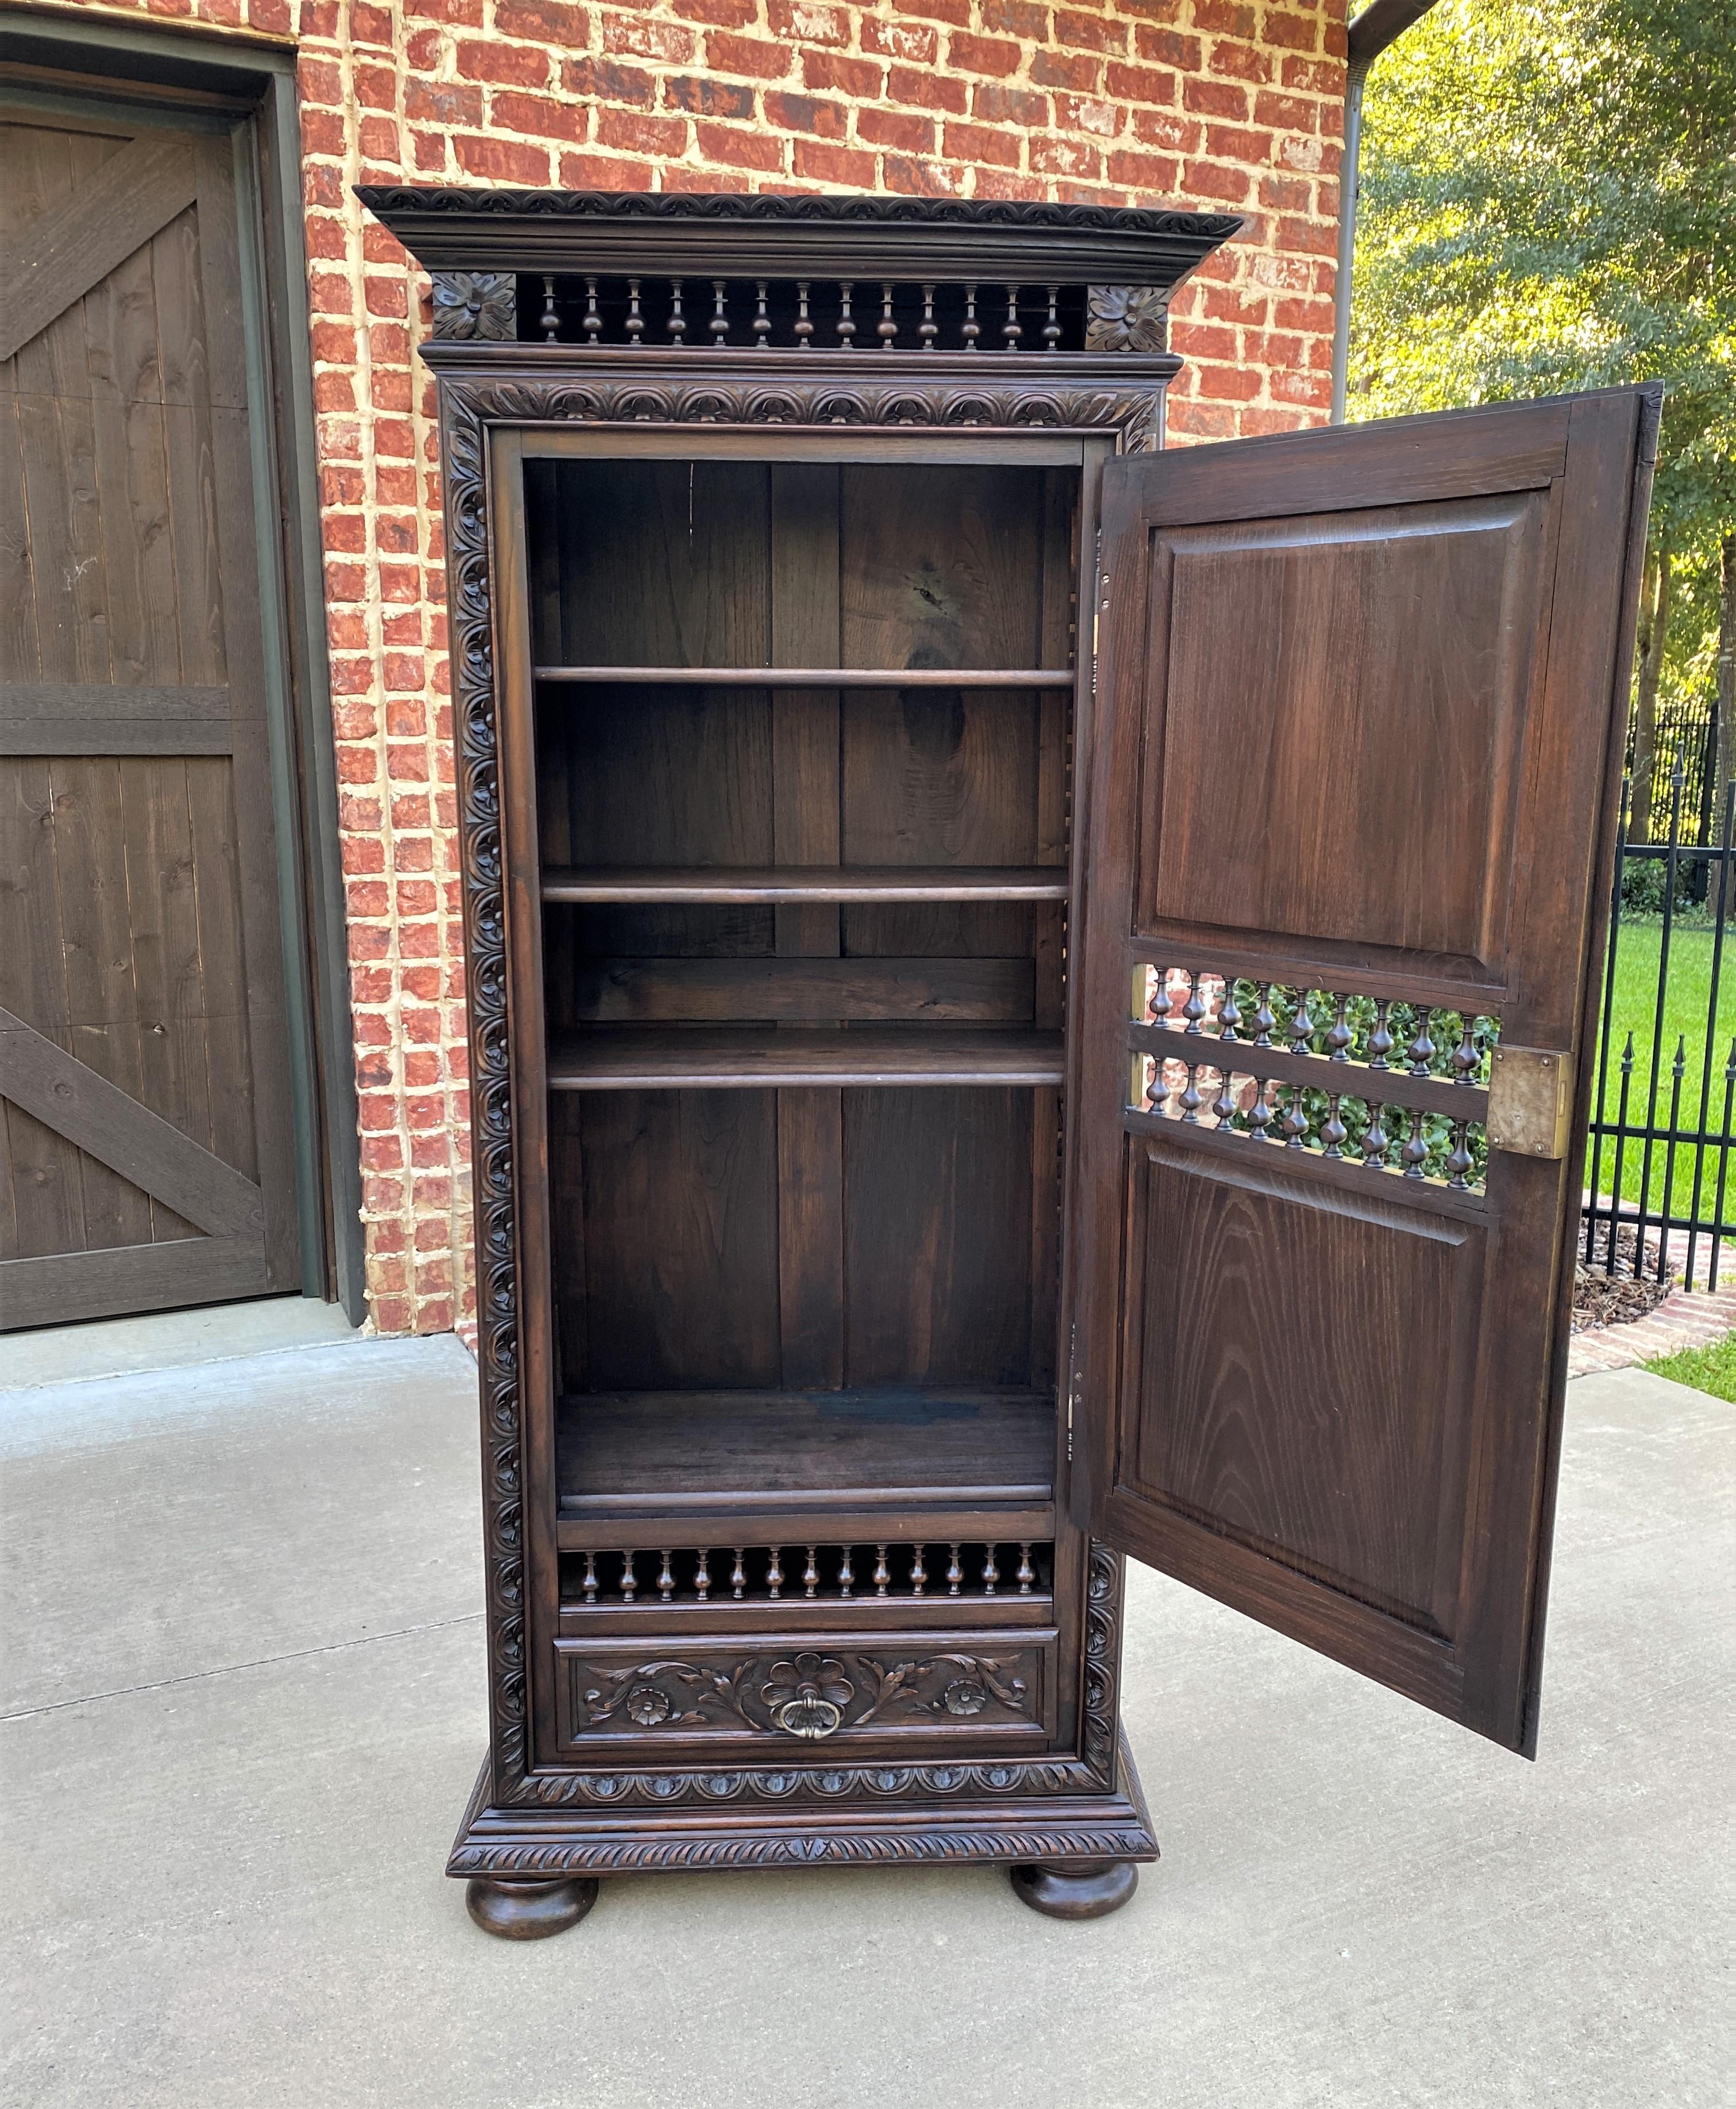 Beautiful 19th century antique French chestnut Breton Brittany cabinet, bookcase, armoire, or wardrobe with interior shelves and lower drawer ~~c. 1880s

Charming carved chestnut cabinet, 